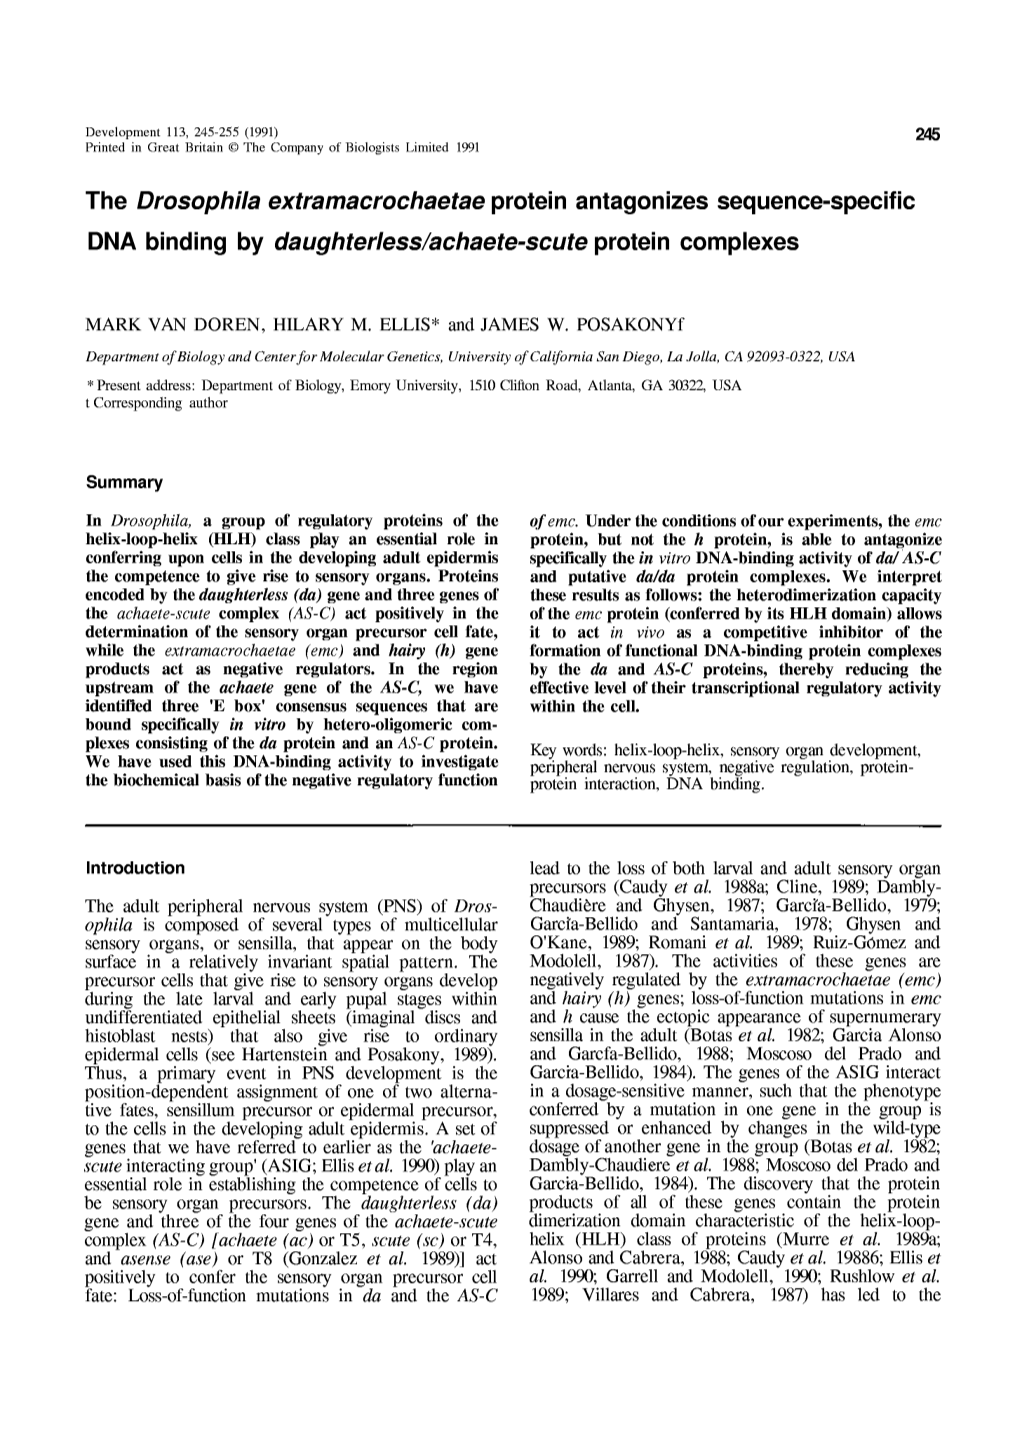 The Drosophila Extramacrochaetae Protein Antagonizes Sequence-Specific DNA Binding by Daughterless/Achaete-Scute Protein Complexes